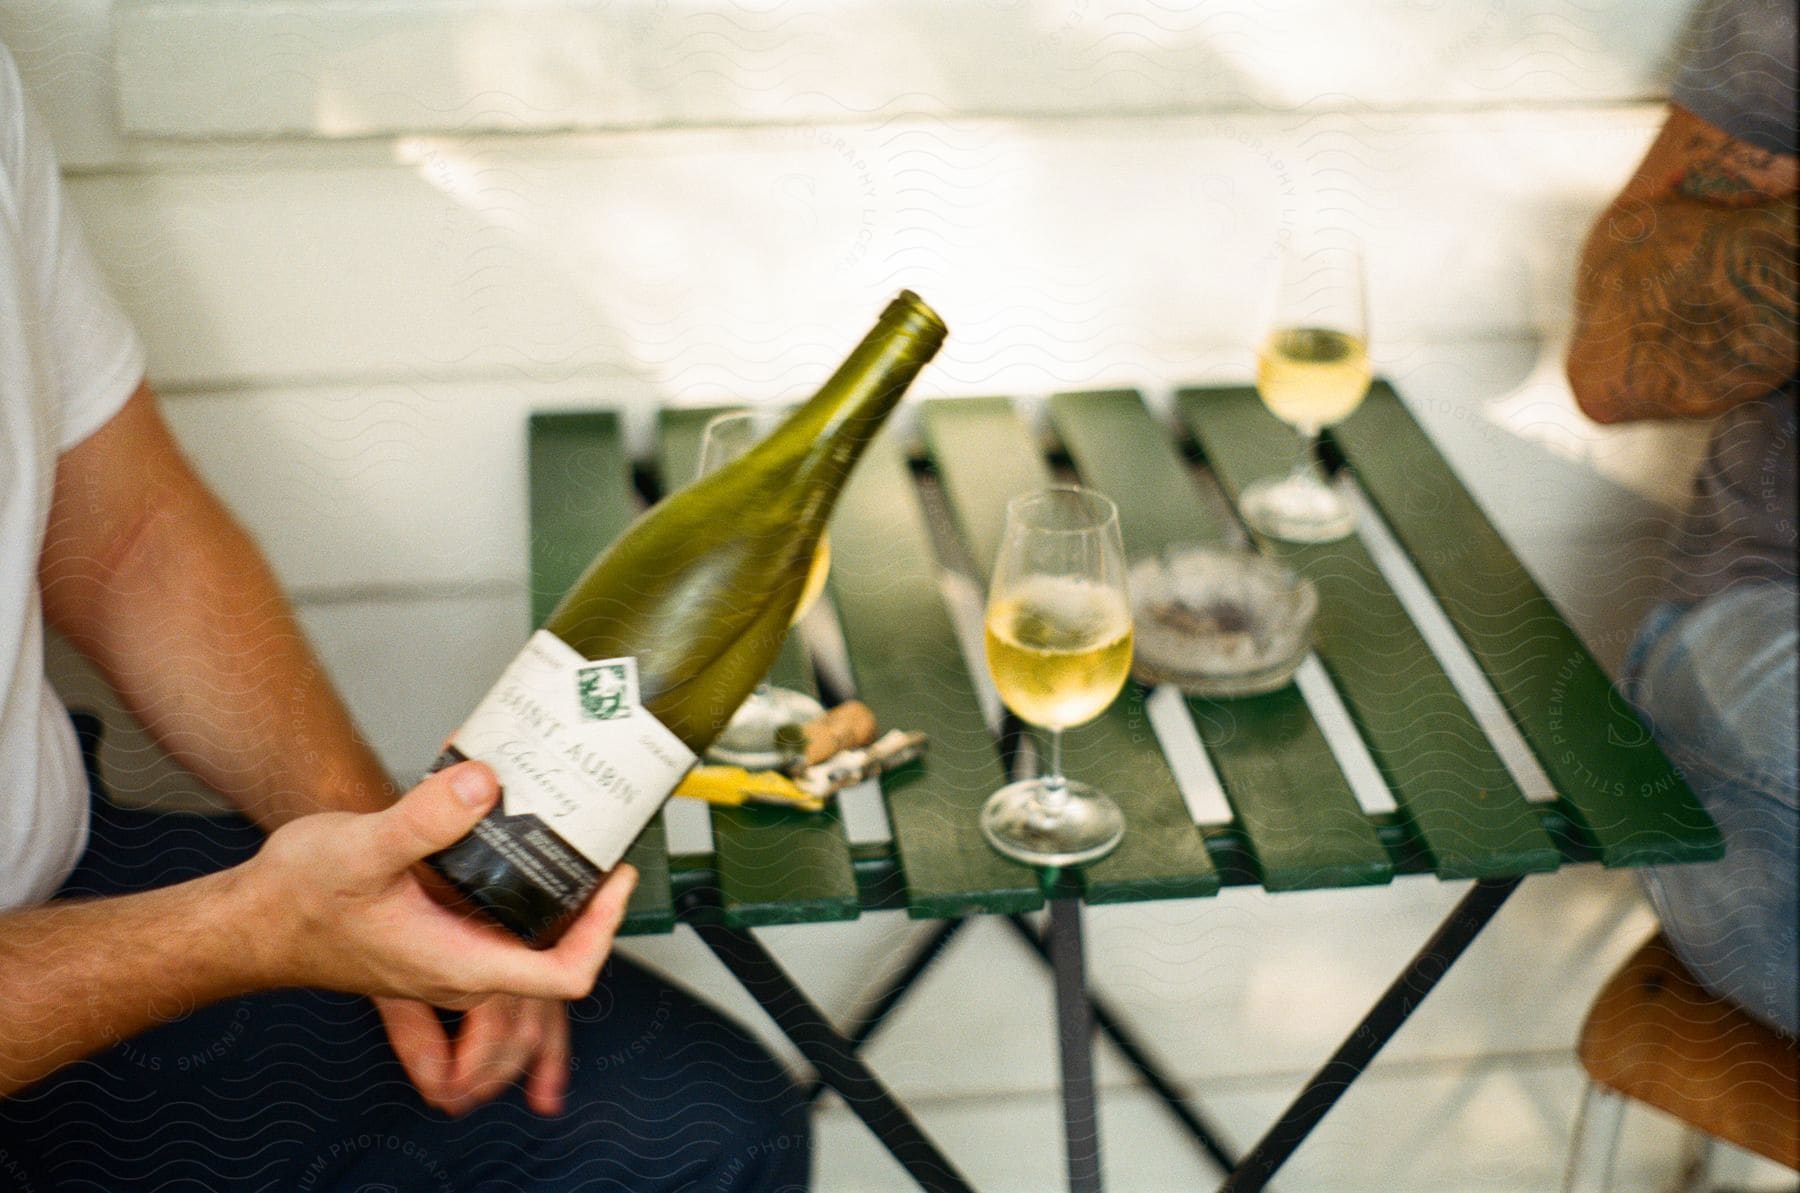 A person holding a wine bottle over a green slatted table with three wine glasses and an ash tray.